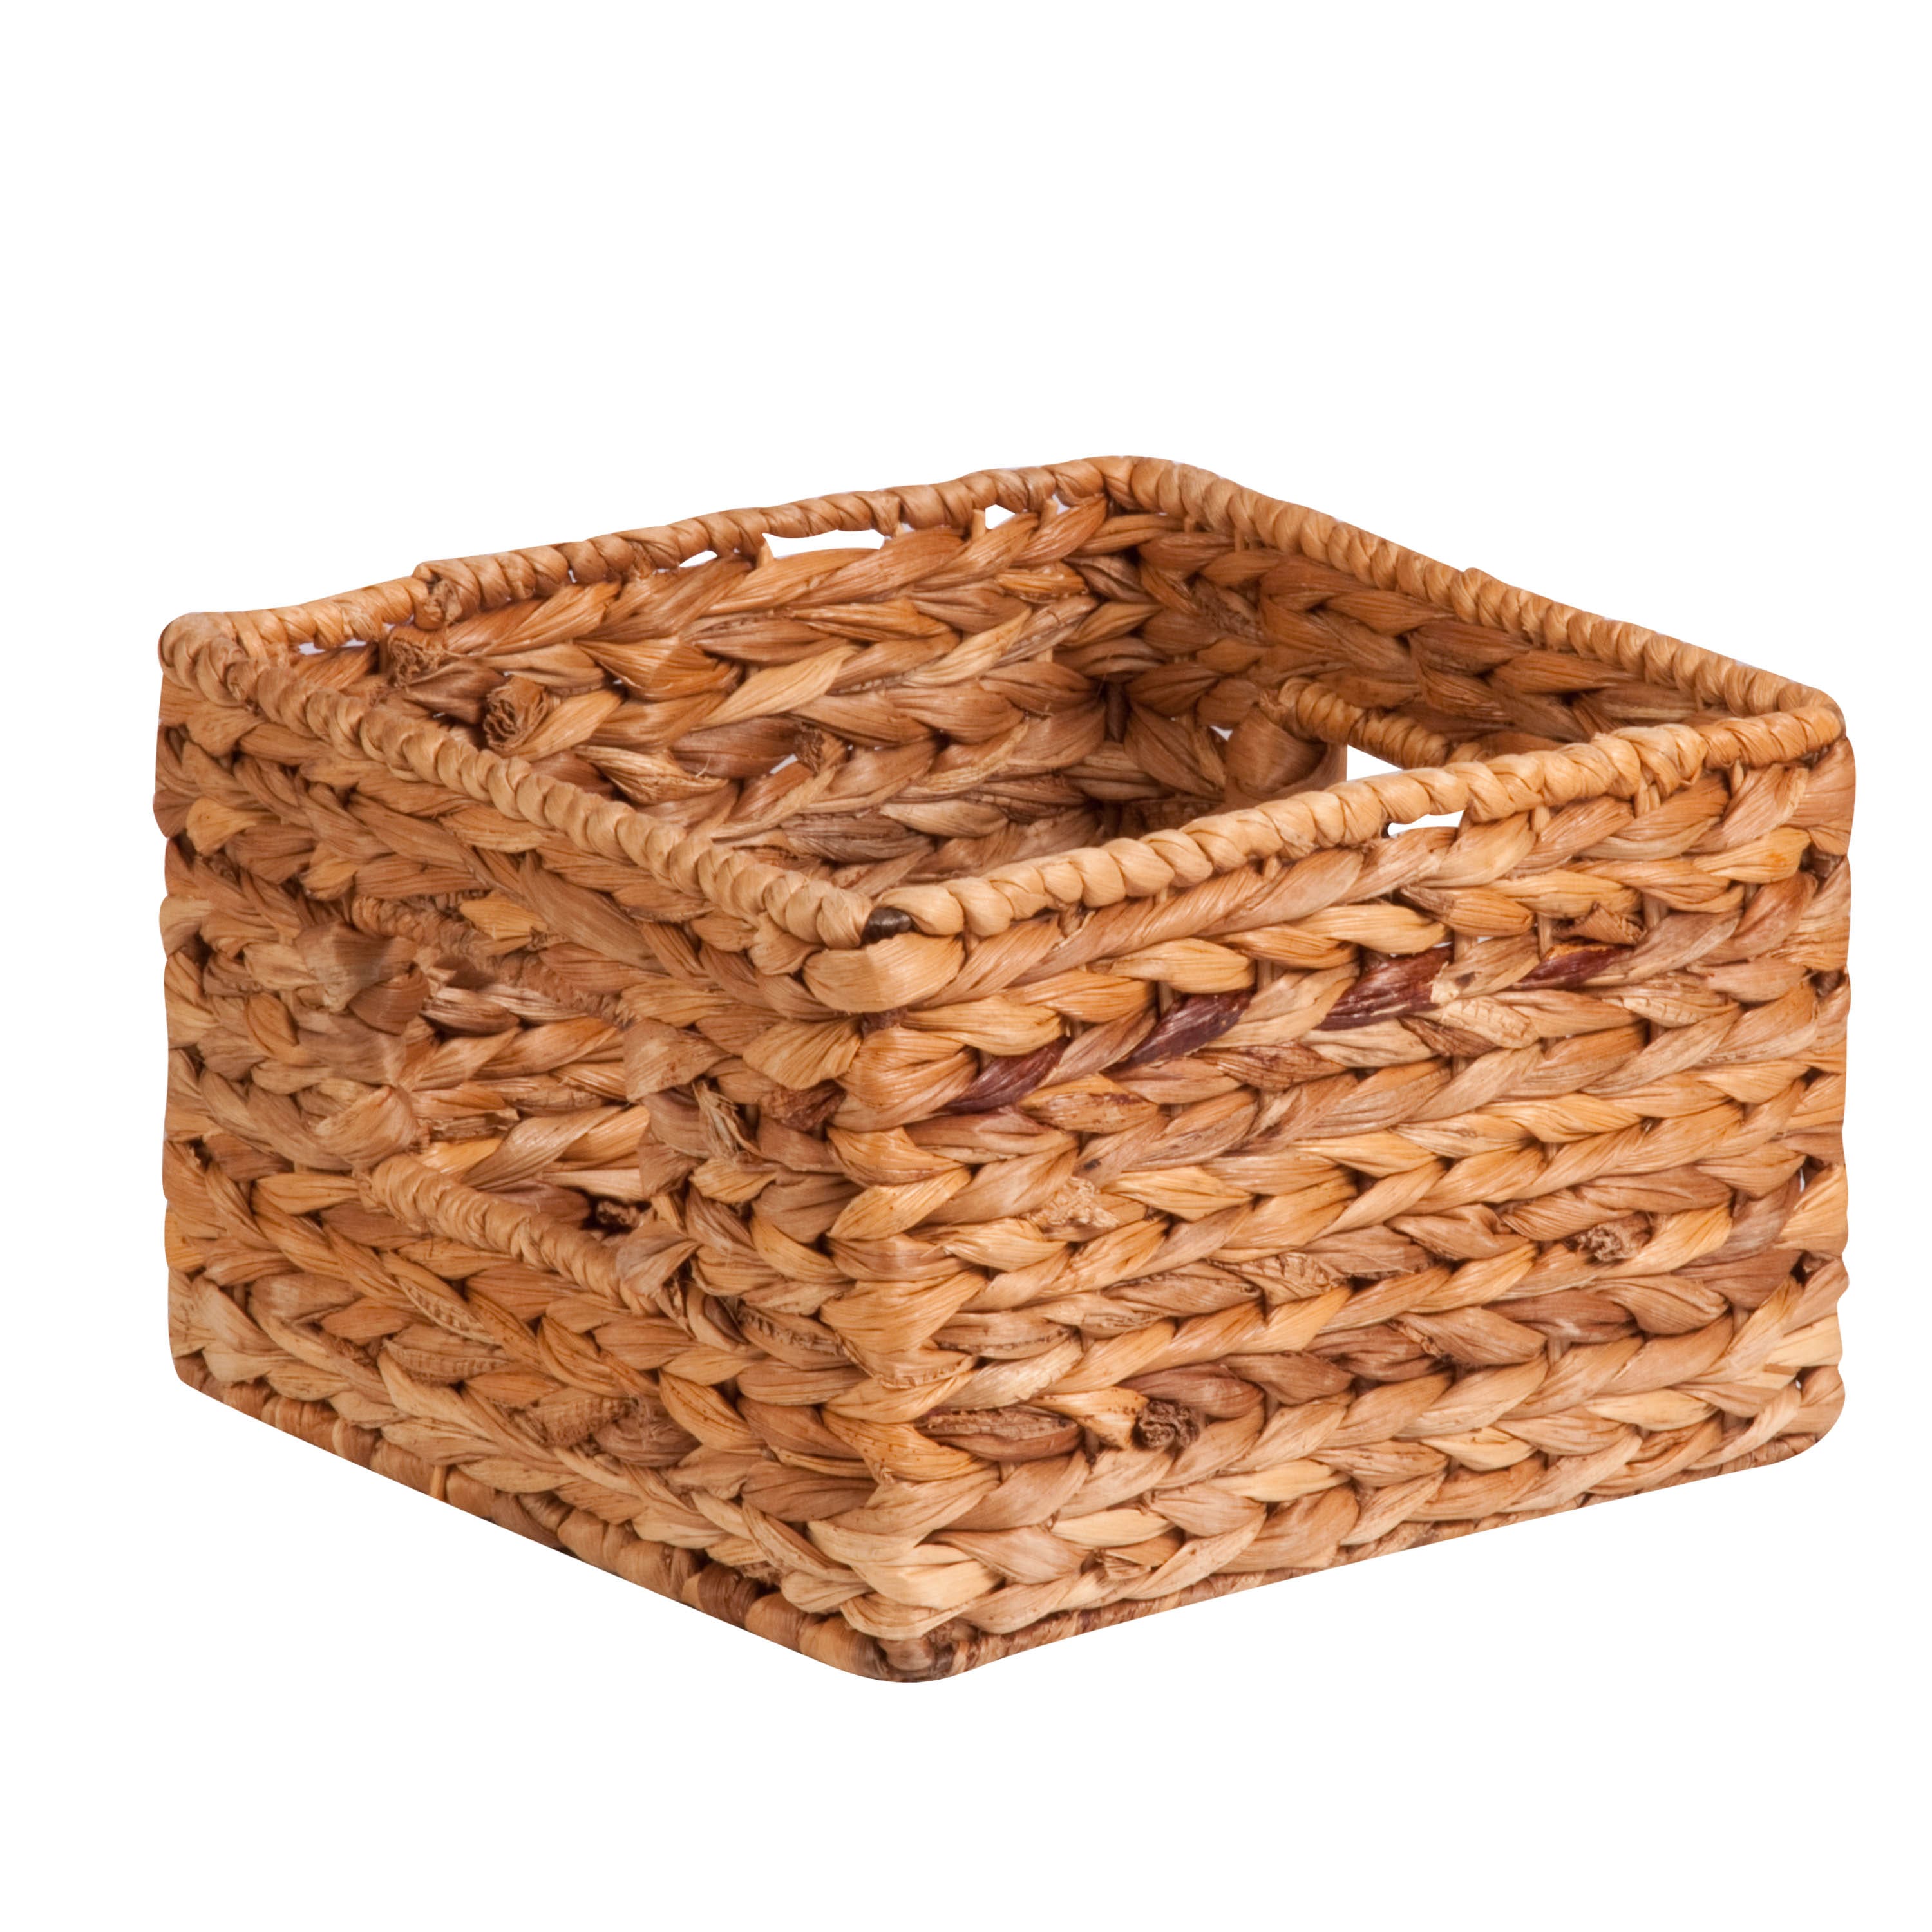 Honey Can Do Natural Woven Hyacinth Nested Storage Basket Set, 3ct.